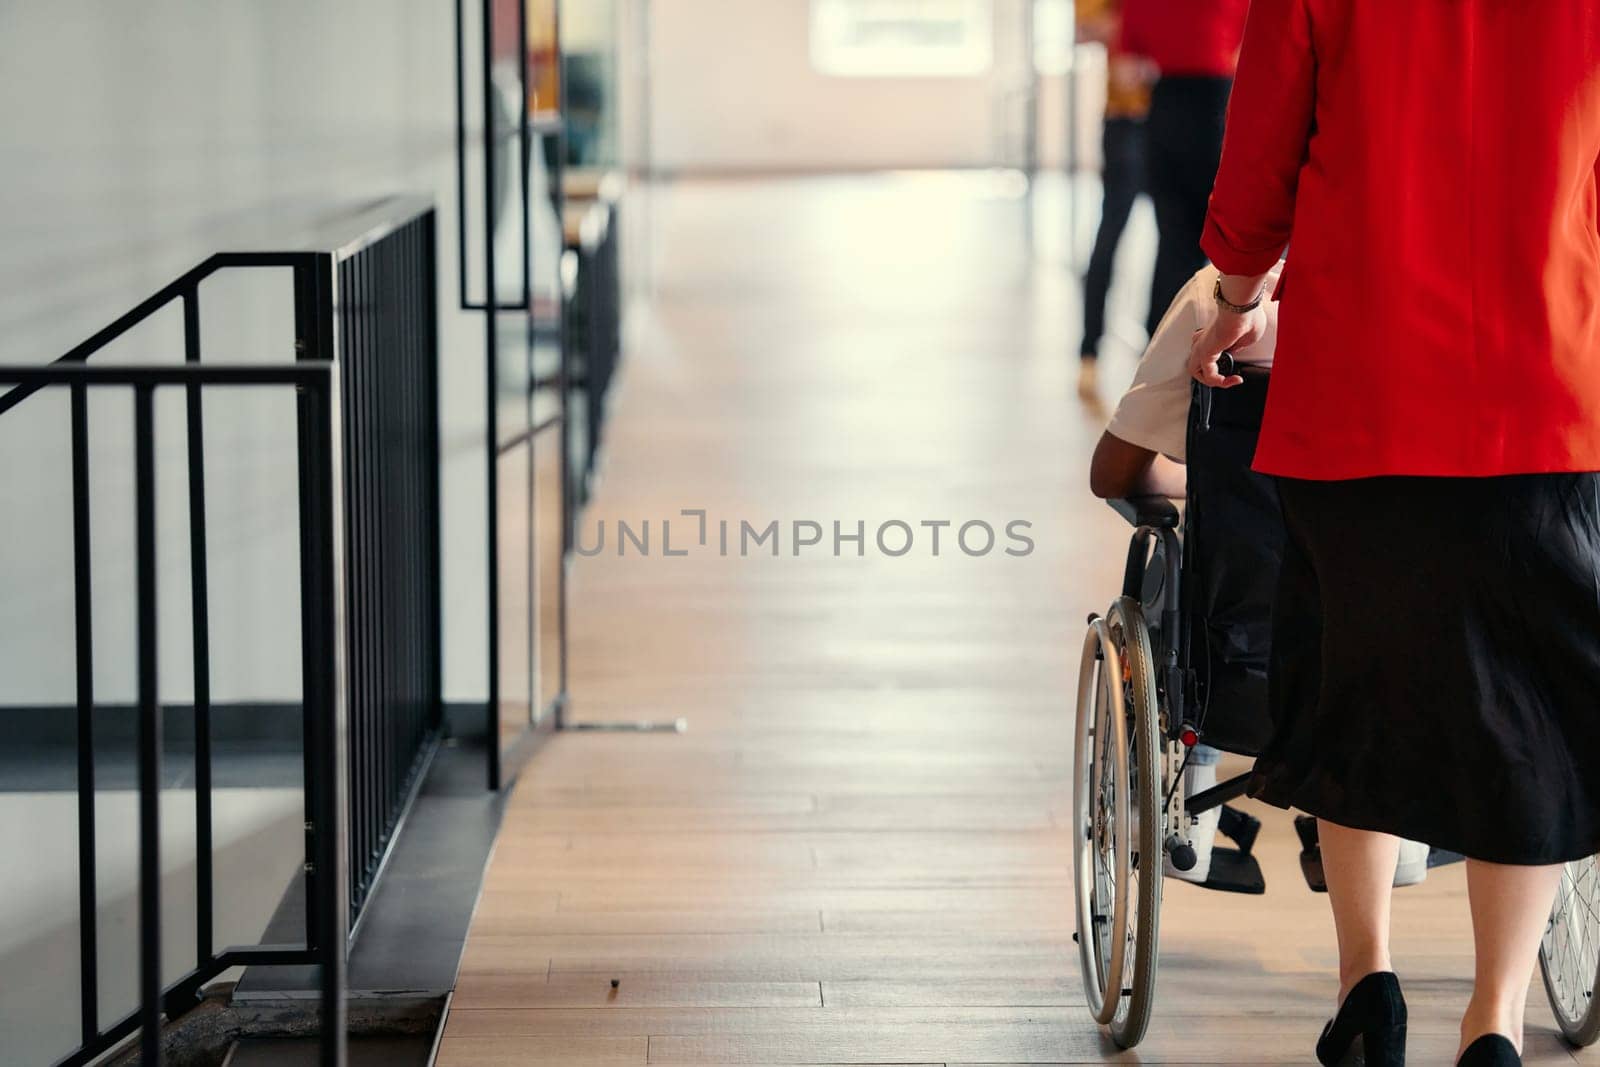 A businesswoman assists her colleague in a wheelchair as they navigate the sleek hallways of a modern startup office, embodying inclusivity and teamwork.